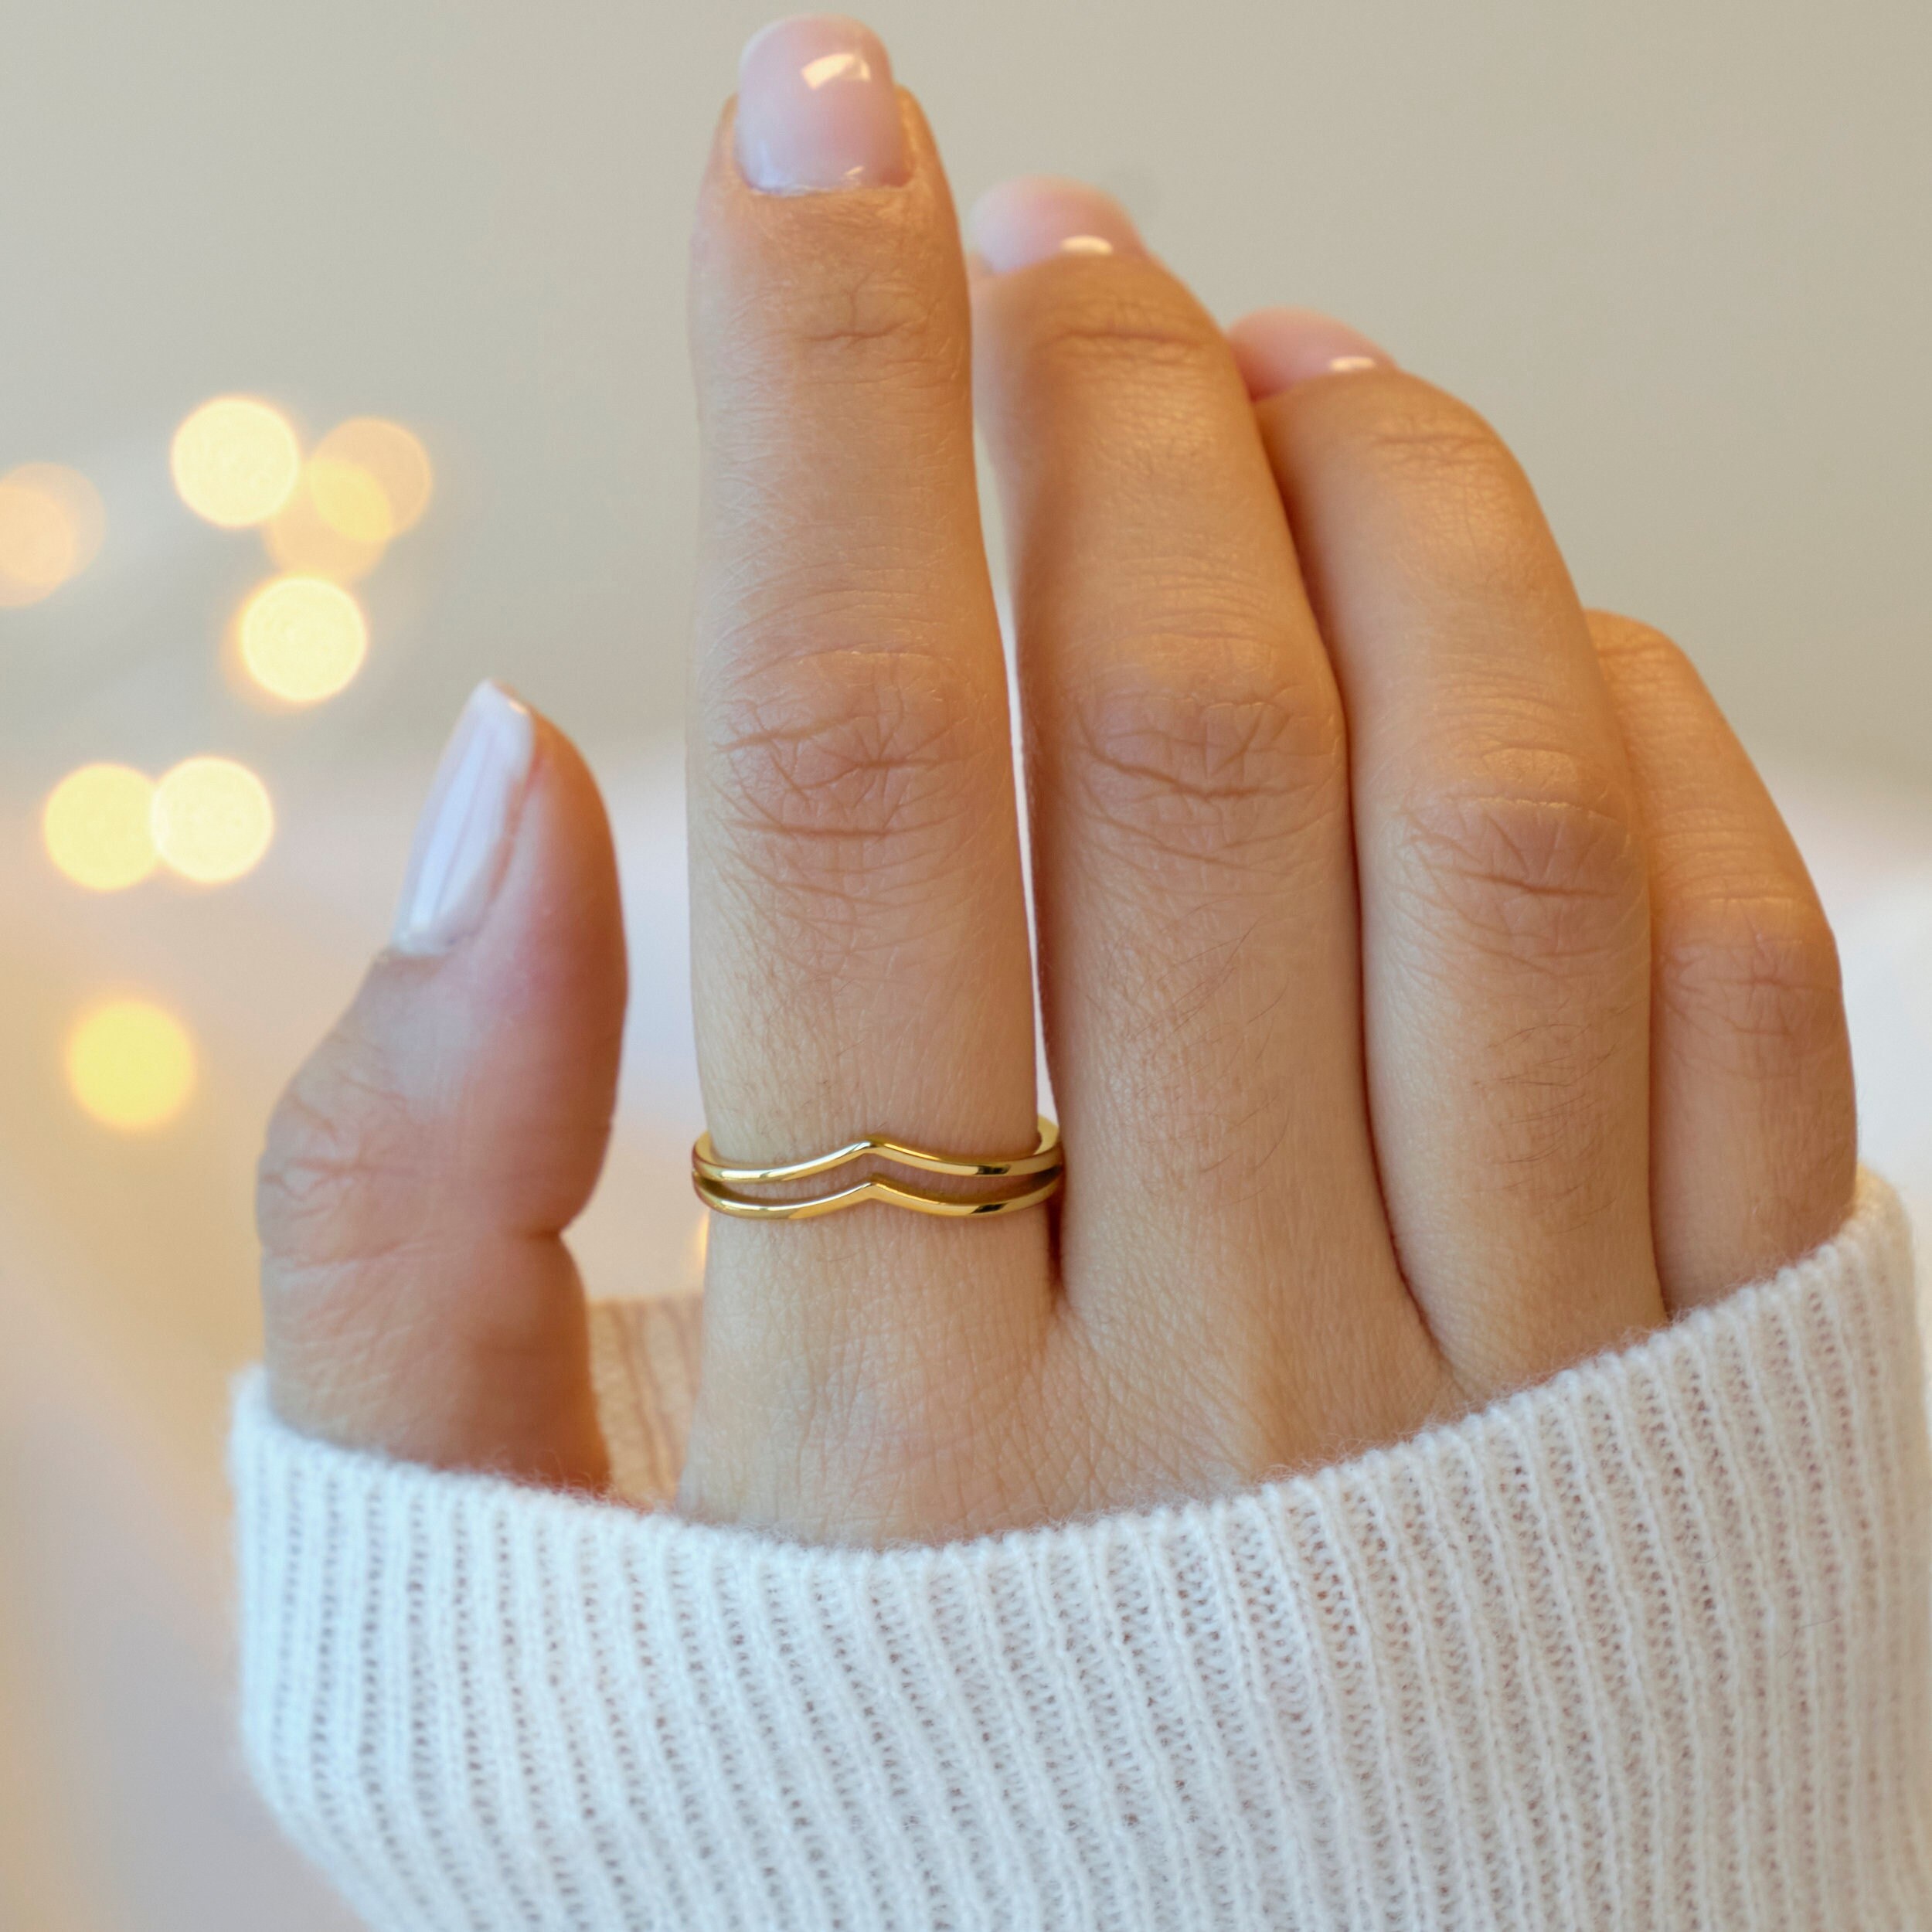 Never Turned Green +1PCS Invisible Ring Size Adjuster FREE 18k Gold Filled Chunky Dome Comfort Fit Ring Stacking Band for Women Jewelry Minimalist 